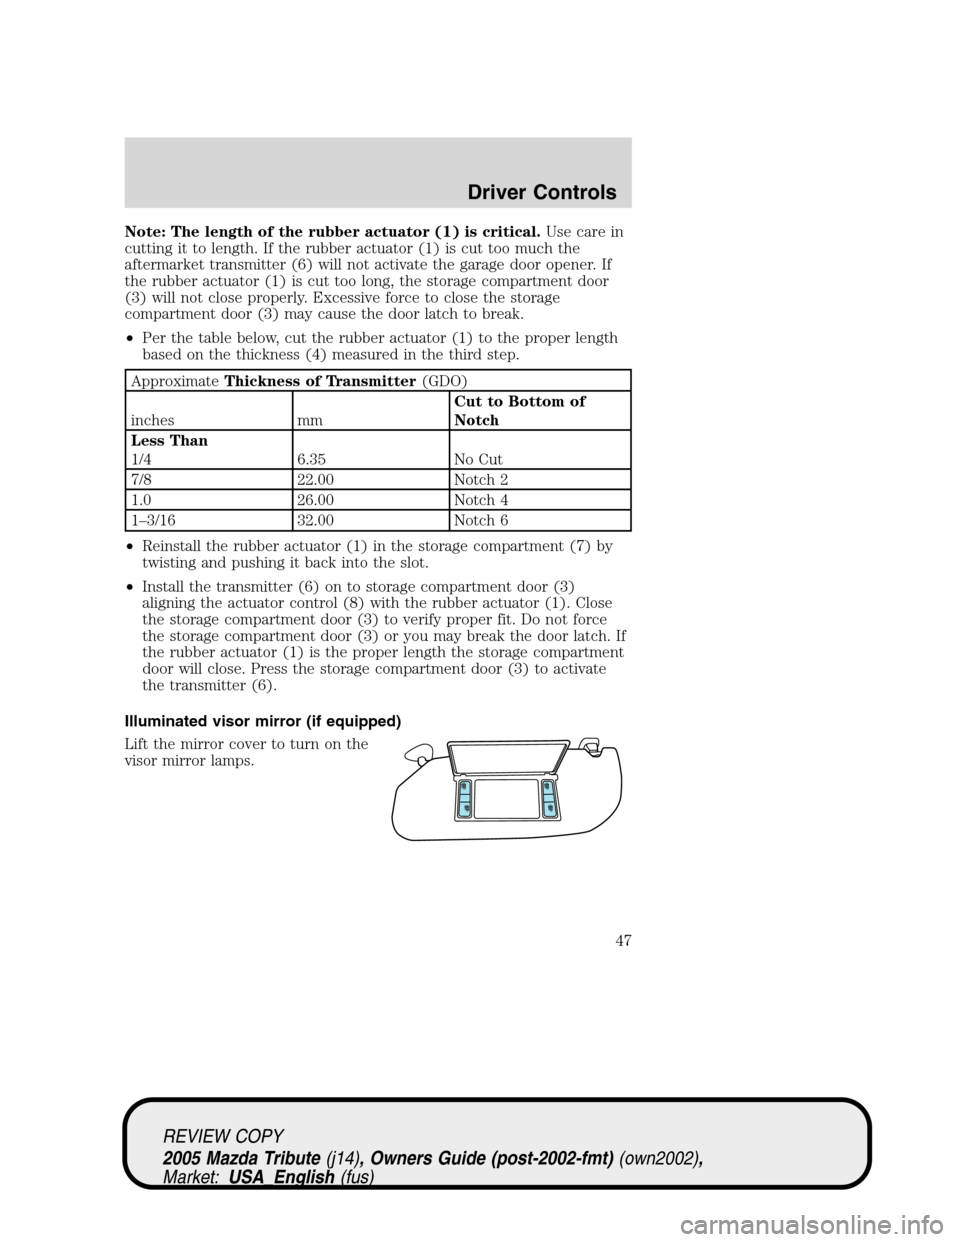 MAZDA MODEL TRIBUTE 2005  Owners Manual (in English) Note: The length of the rubber actuator (1) is critical.Use care in
cutting it to length. If the rubber actuator (1) is cut too much the
aftermarket transmitter (6) will not activate the garage door o